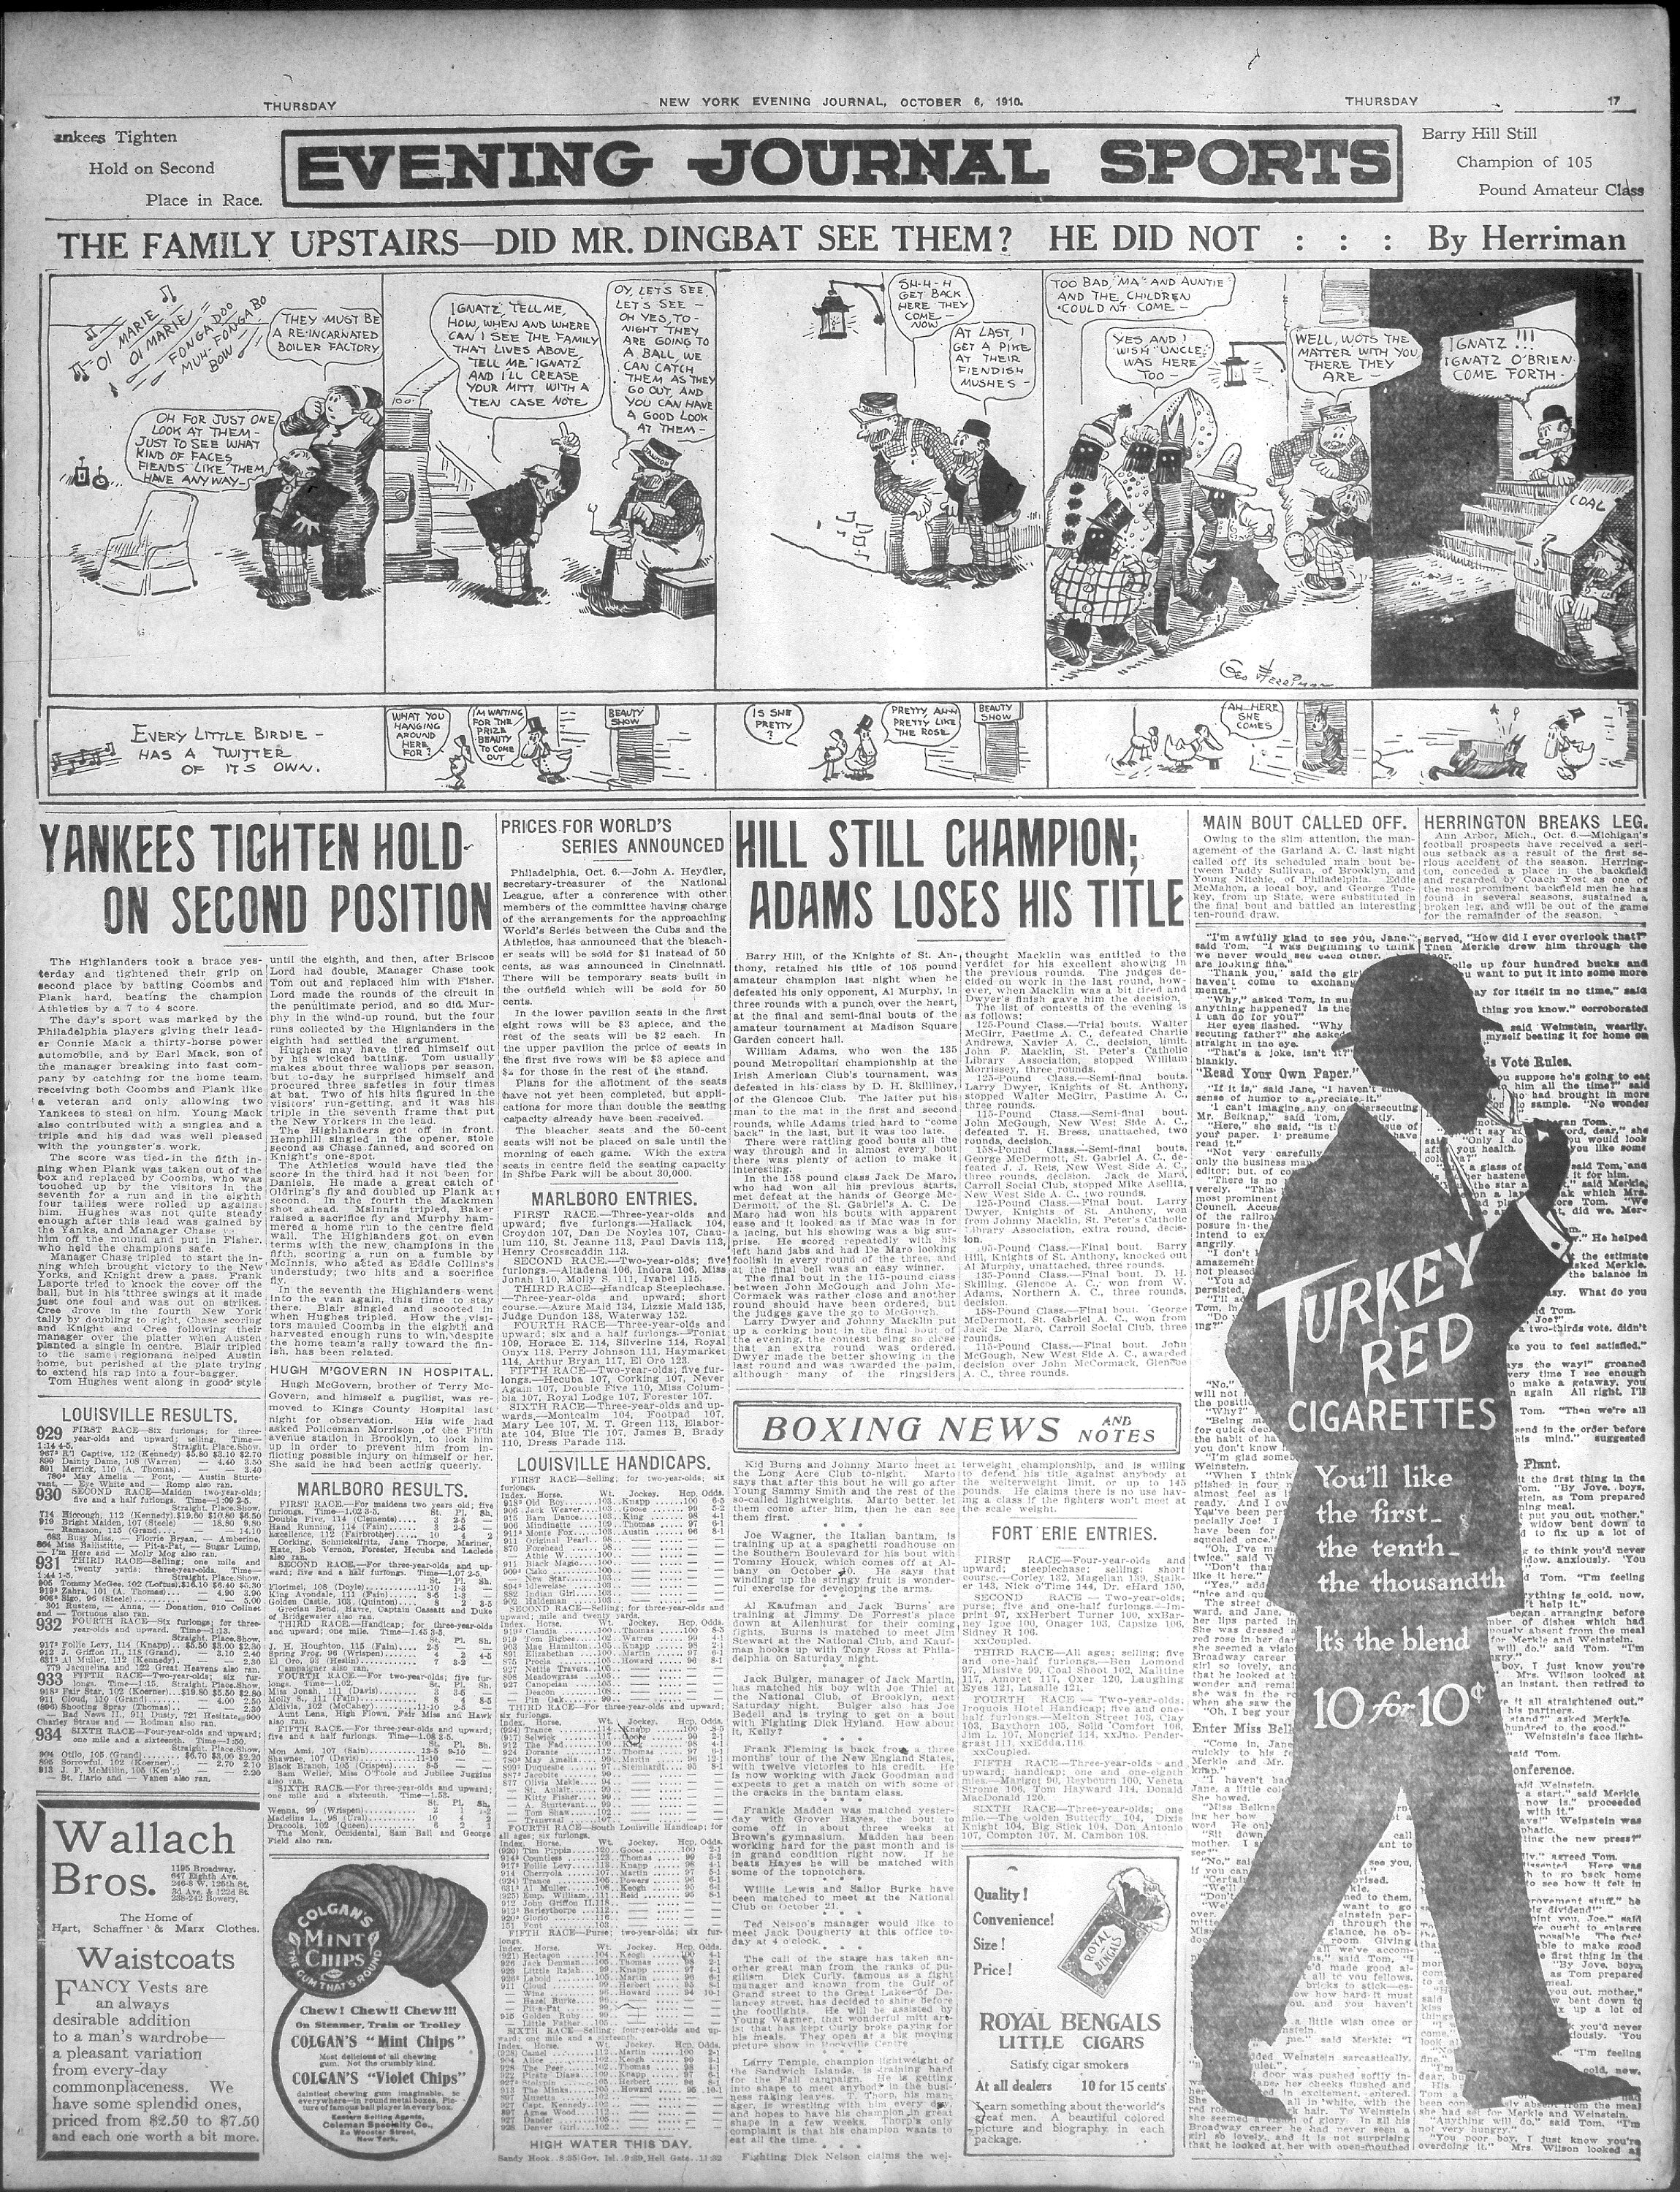 12-nyej-10-6-1910-sports-page-with-family-upstairs-and-%22ignatz%22-reference-.jpg